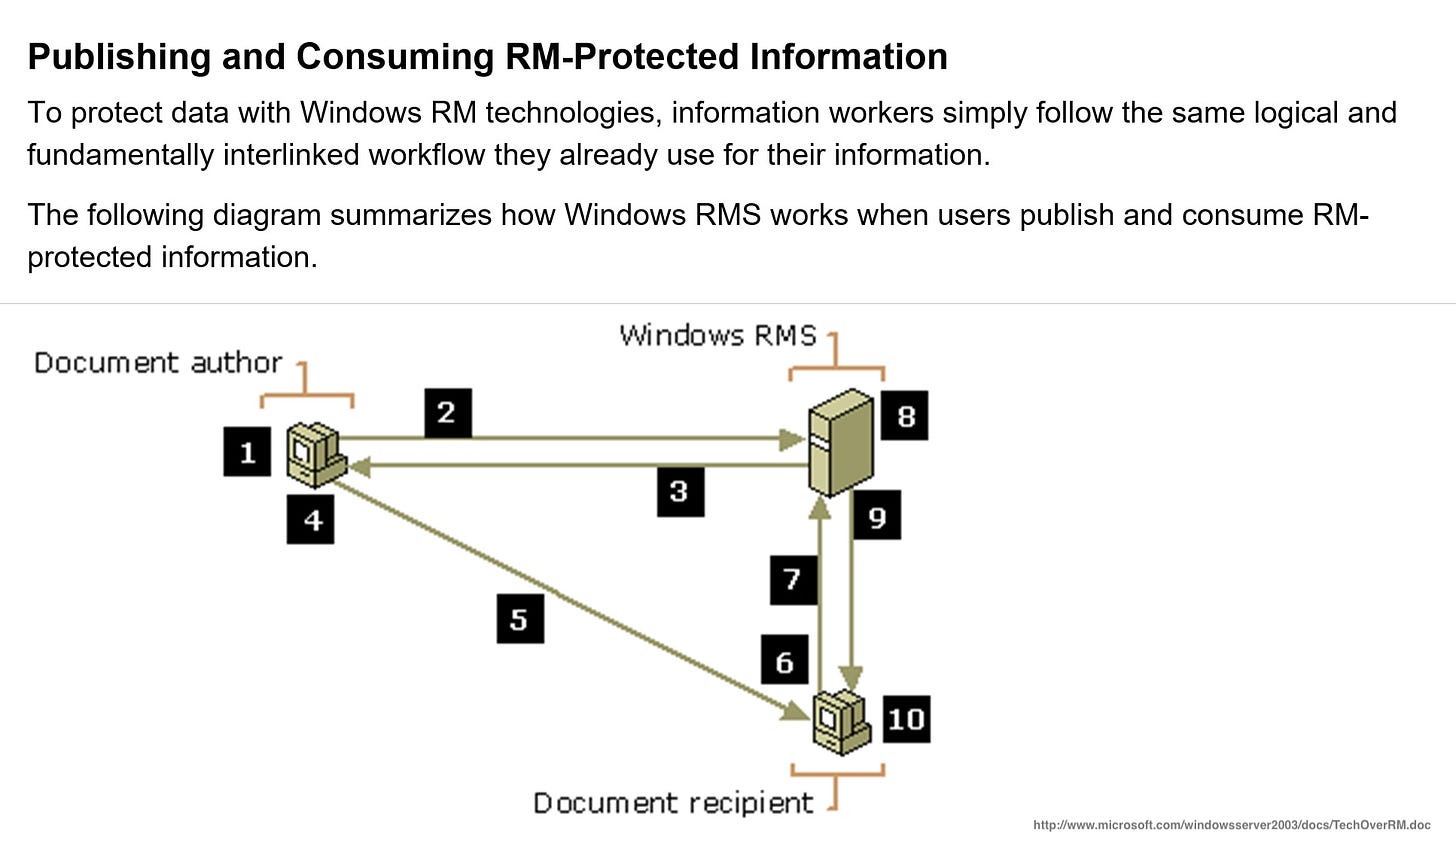 Publishing and Consuming RM-Protected Information To protect data with Windows RM technologies, information workers simply follow the same logical and fundamentally interlinked workflow they already use for their information. The following diagram summarizes how Windows RMS works when users publish and consume RM- protected information.